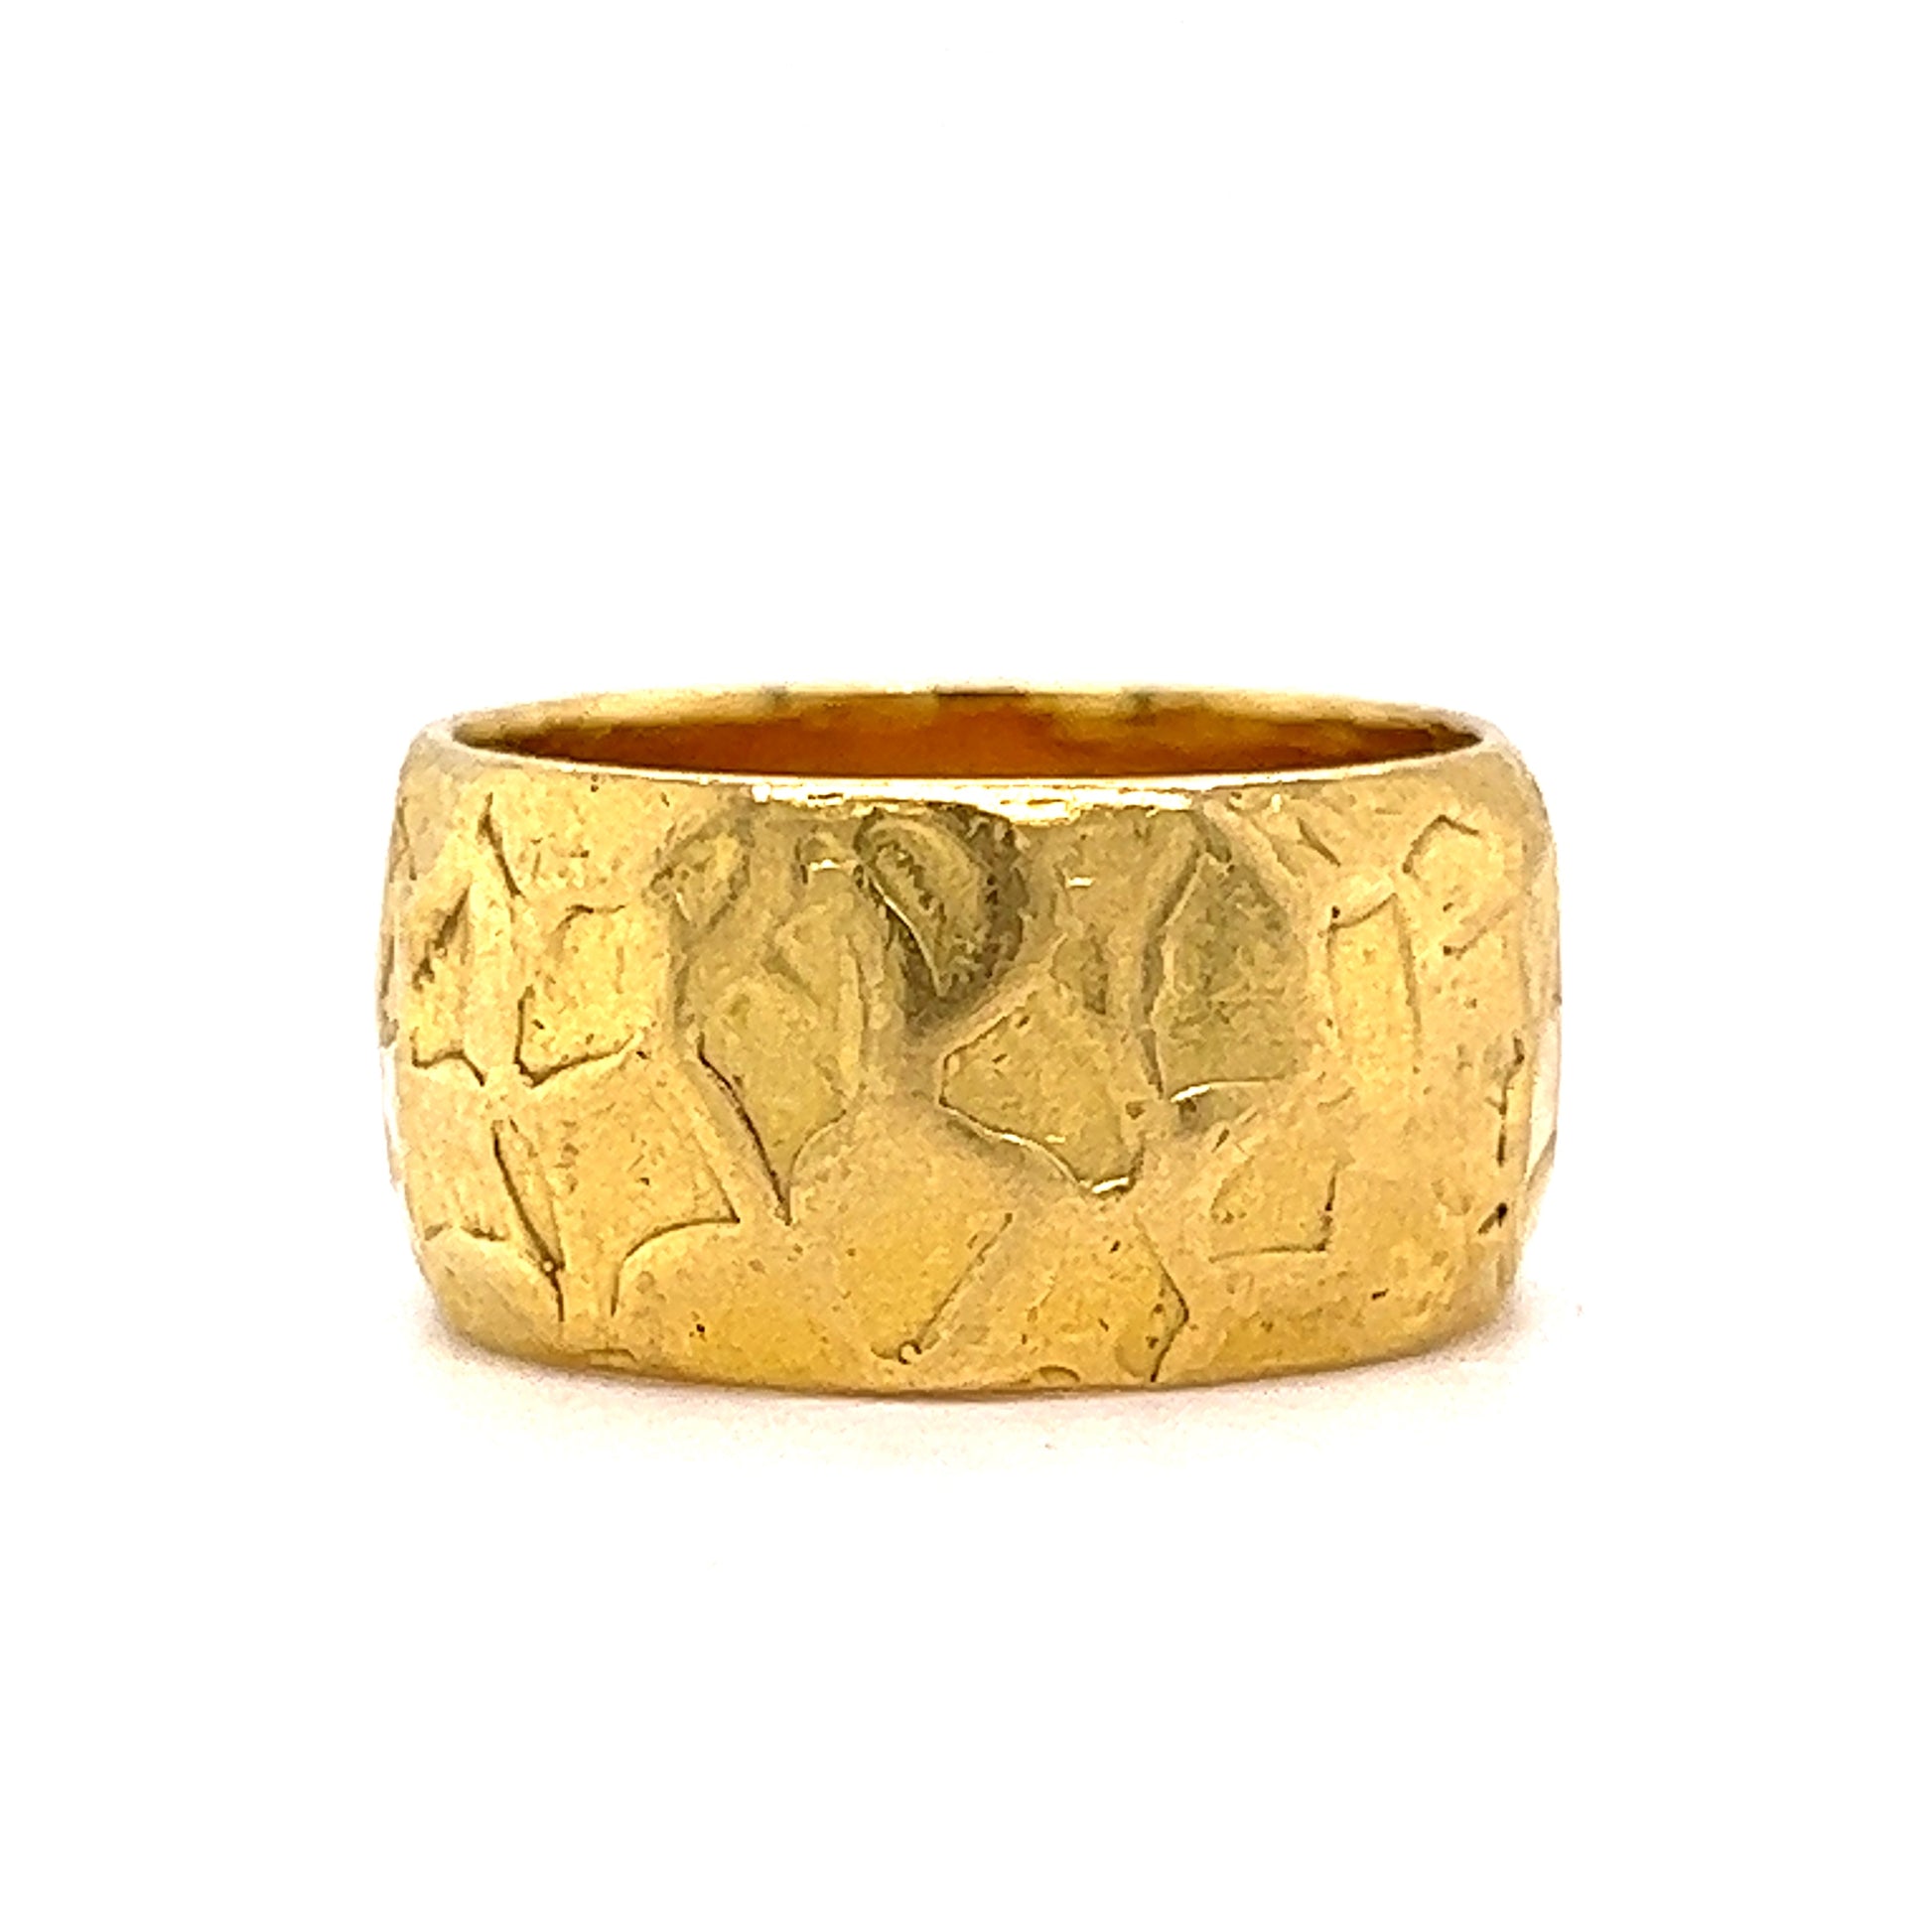 10mm Textured Band in 18k Yellow GoldComposition: 18 Karat Yellow GoldRing Size: 6.5Total Gram Weight: 9.4 g